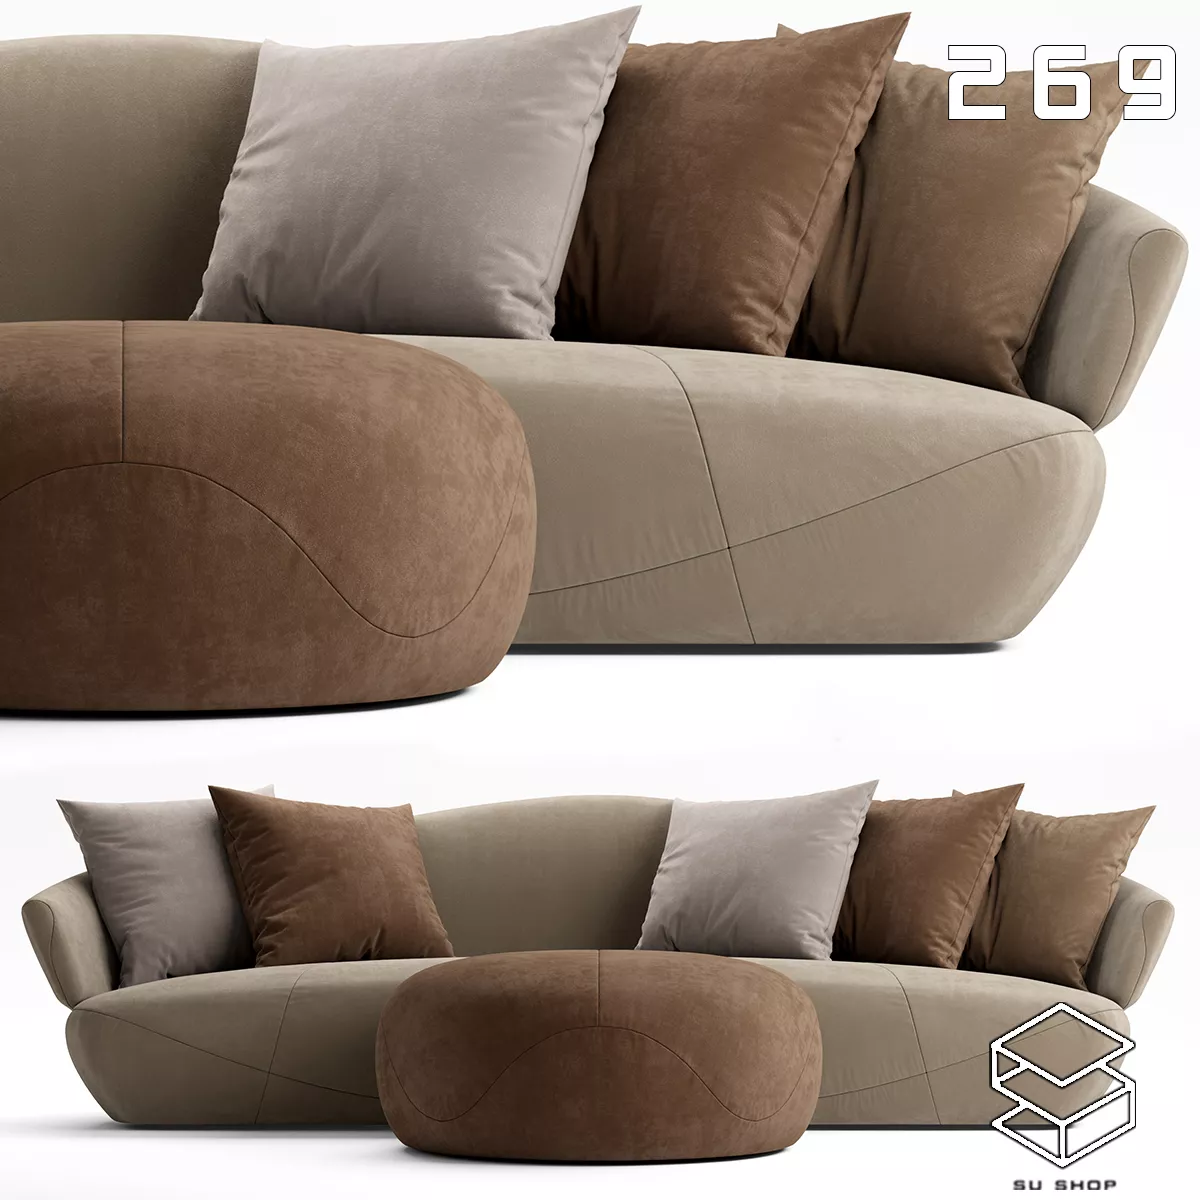 MODERN SOFA - SKETCHUP 3D MODEL - VRAY OR ENSCAPE - ID13573